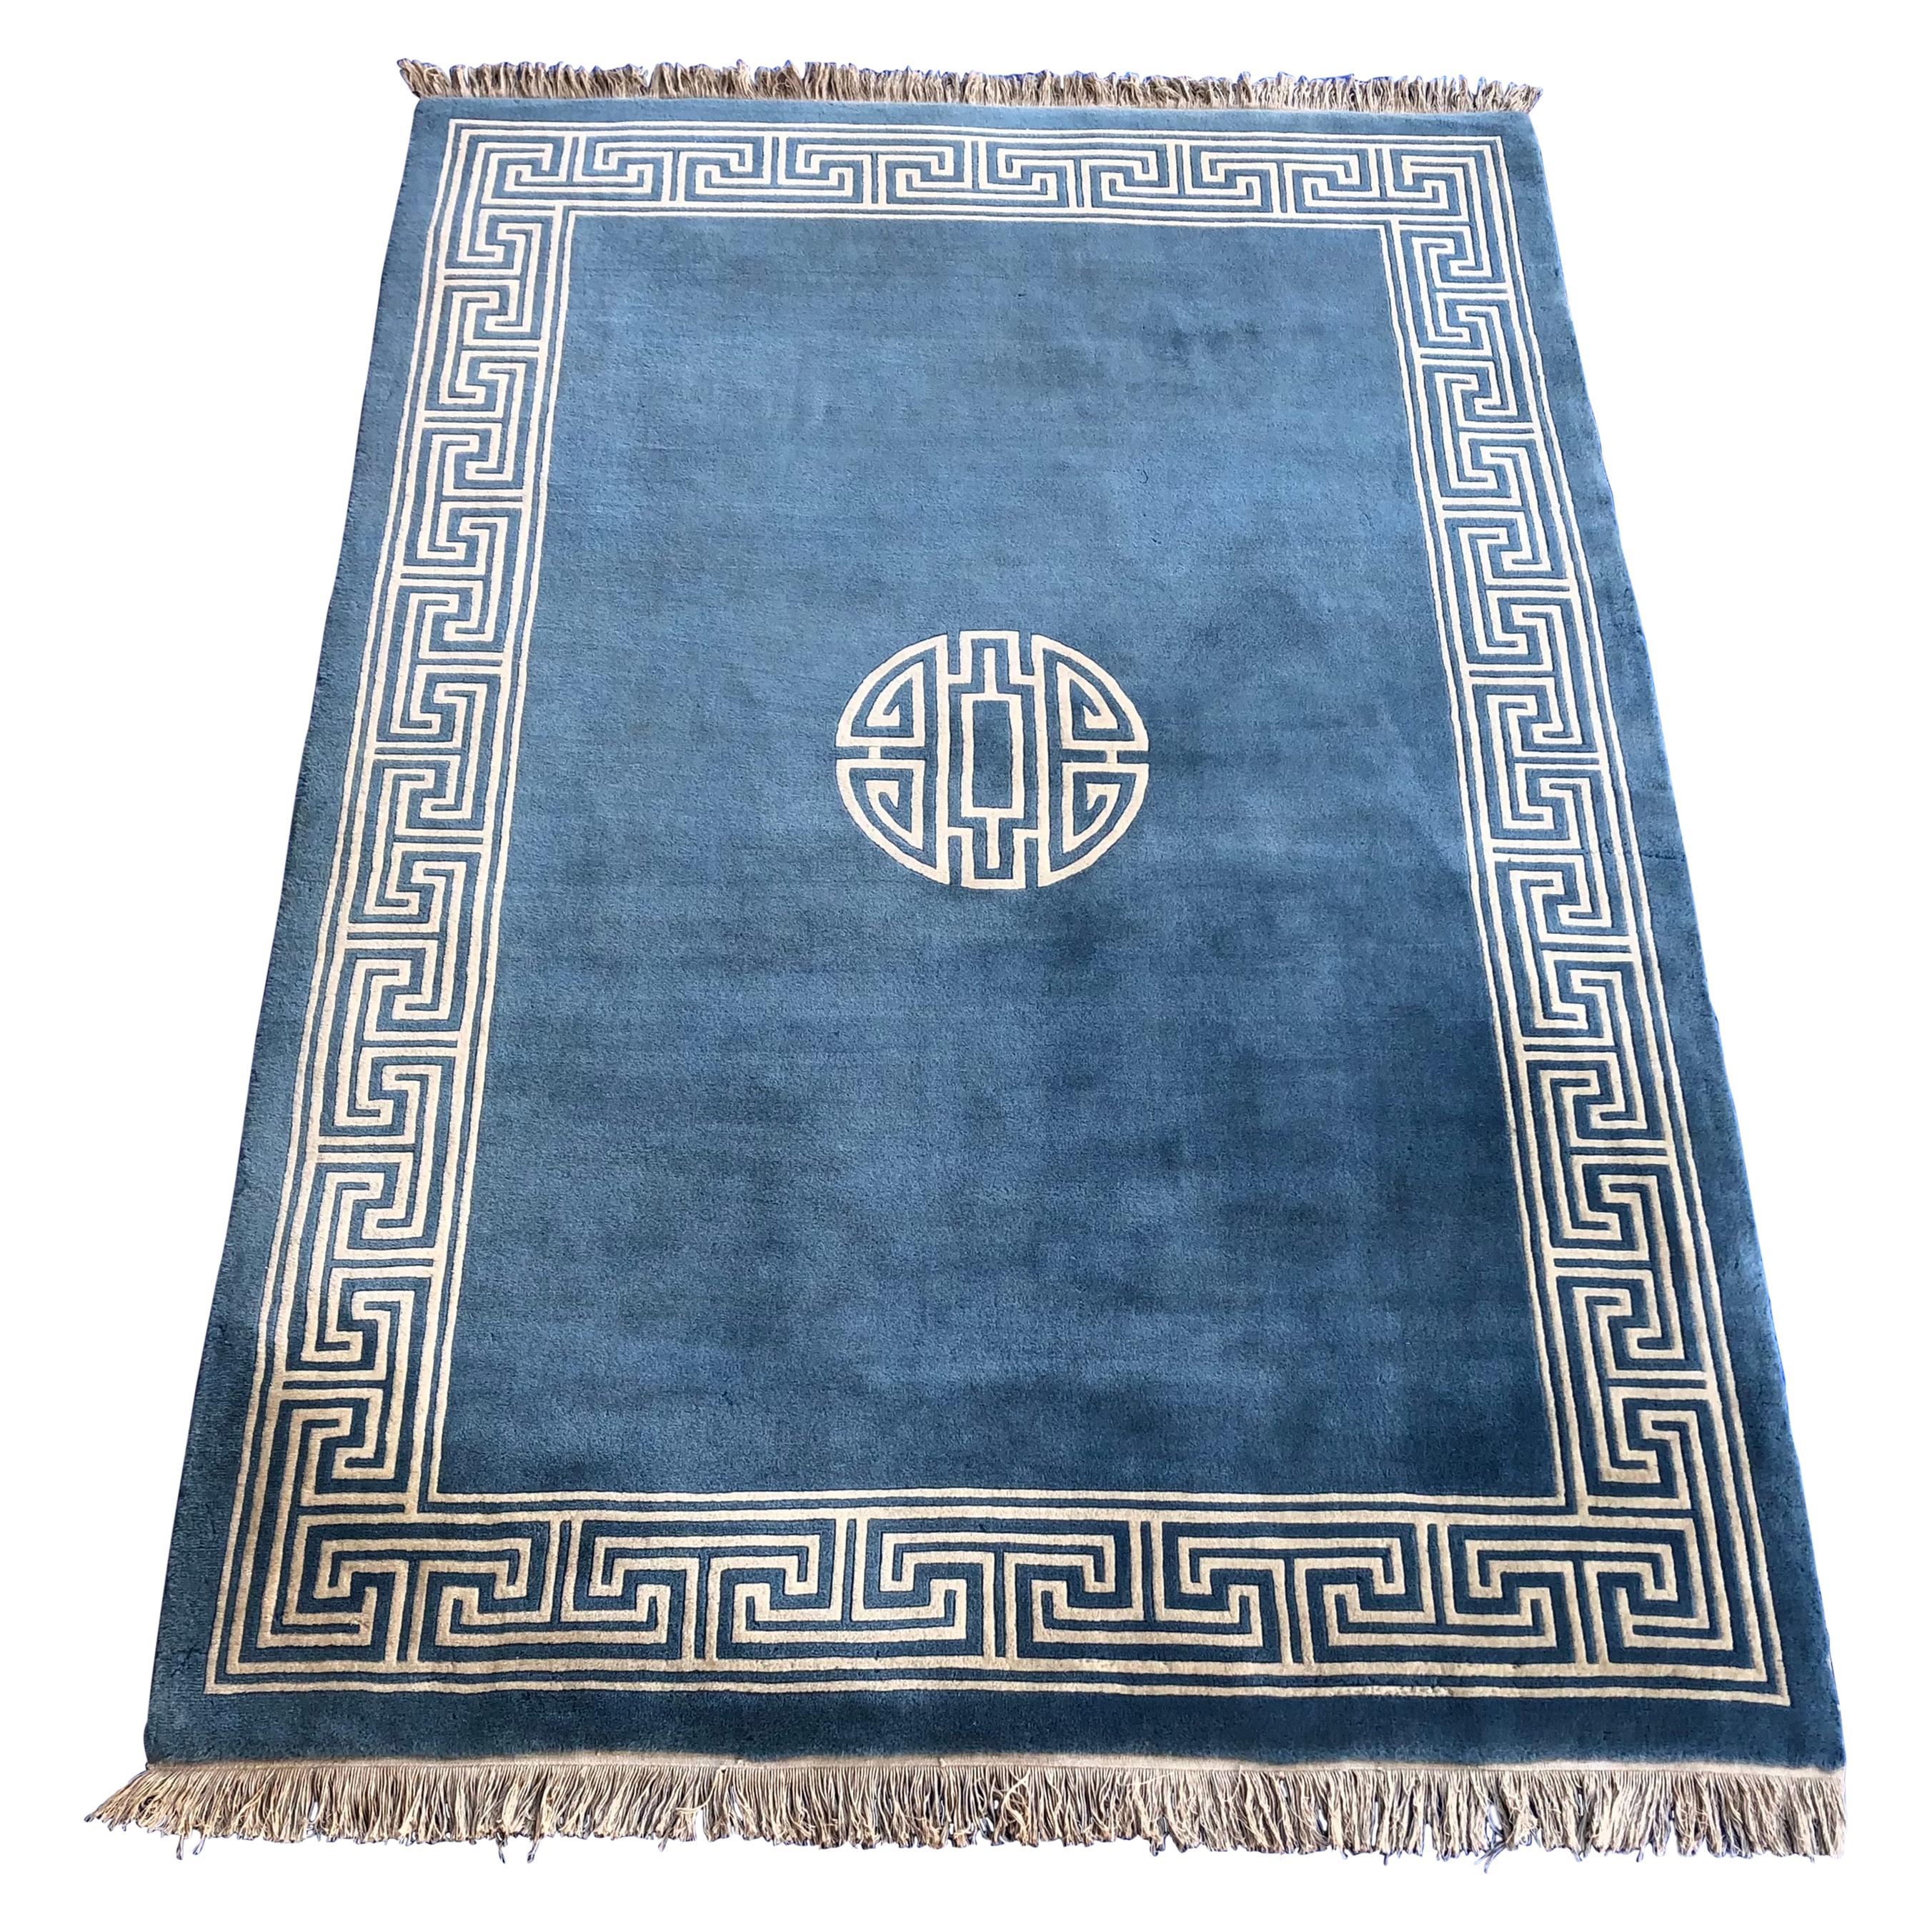 Stunning Blue and Beige Antique Collectible Ningxia or Ningshia Silk Area Rug